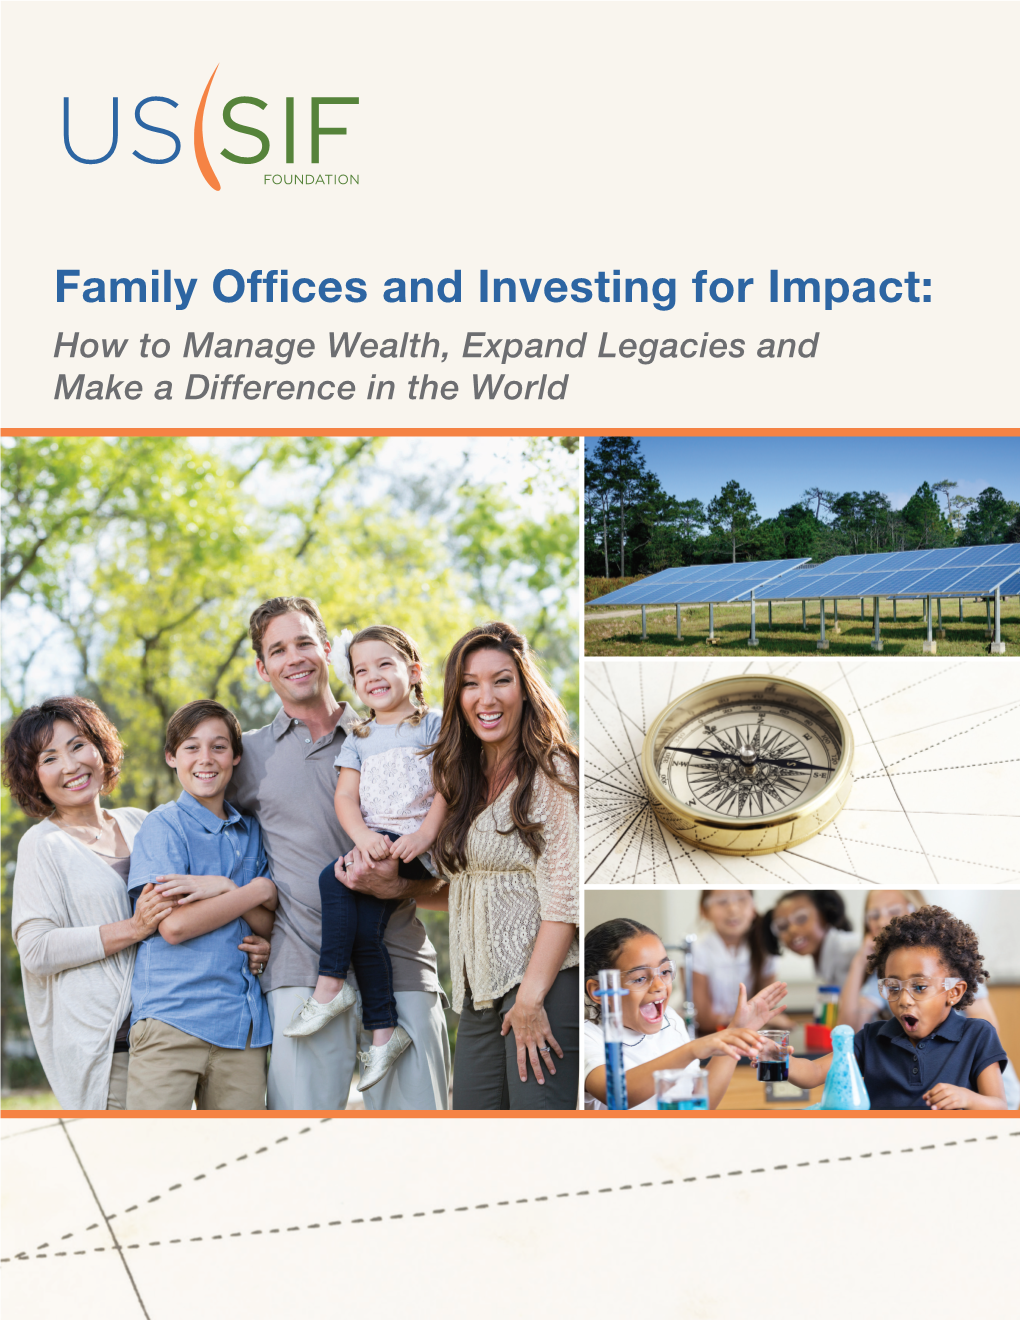 Family Offices and Investing for Impact: How to Manage Wealth, Expand Legacies and Make a Difference in the World